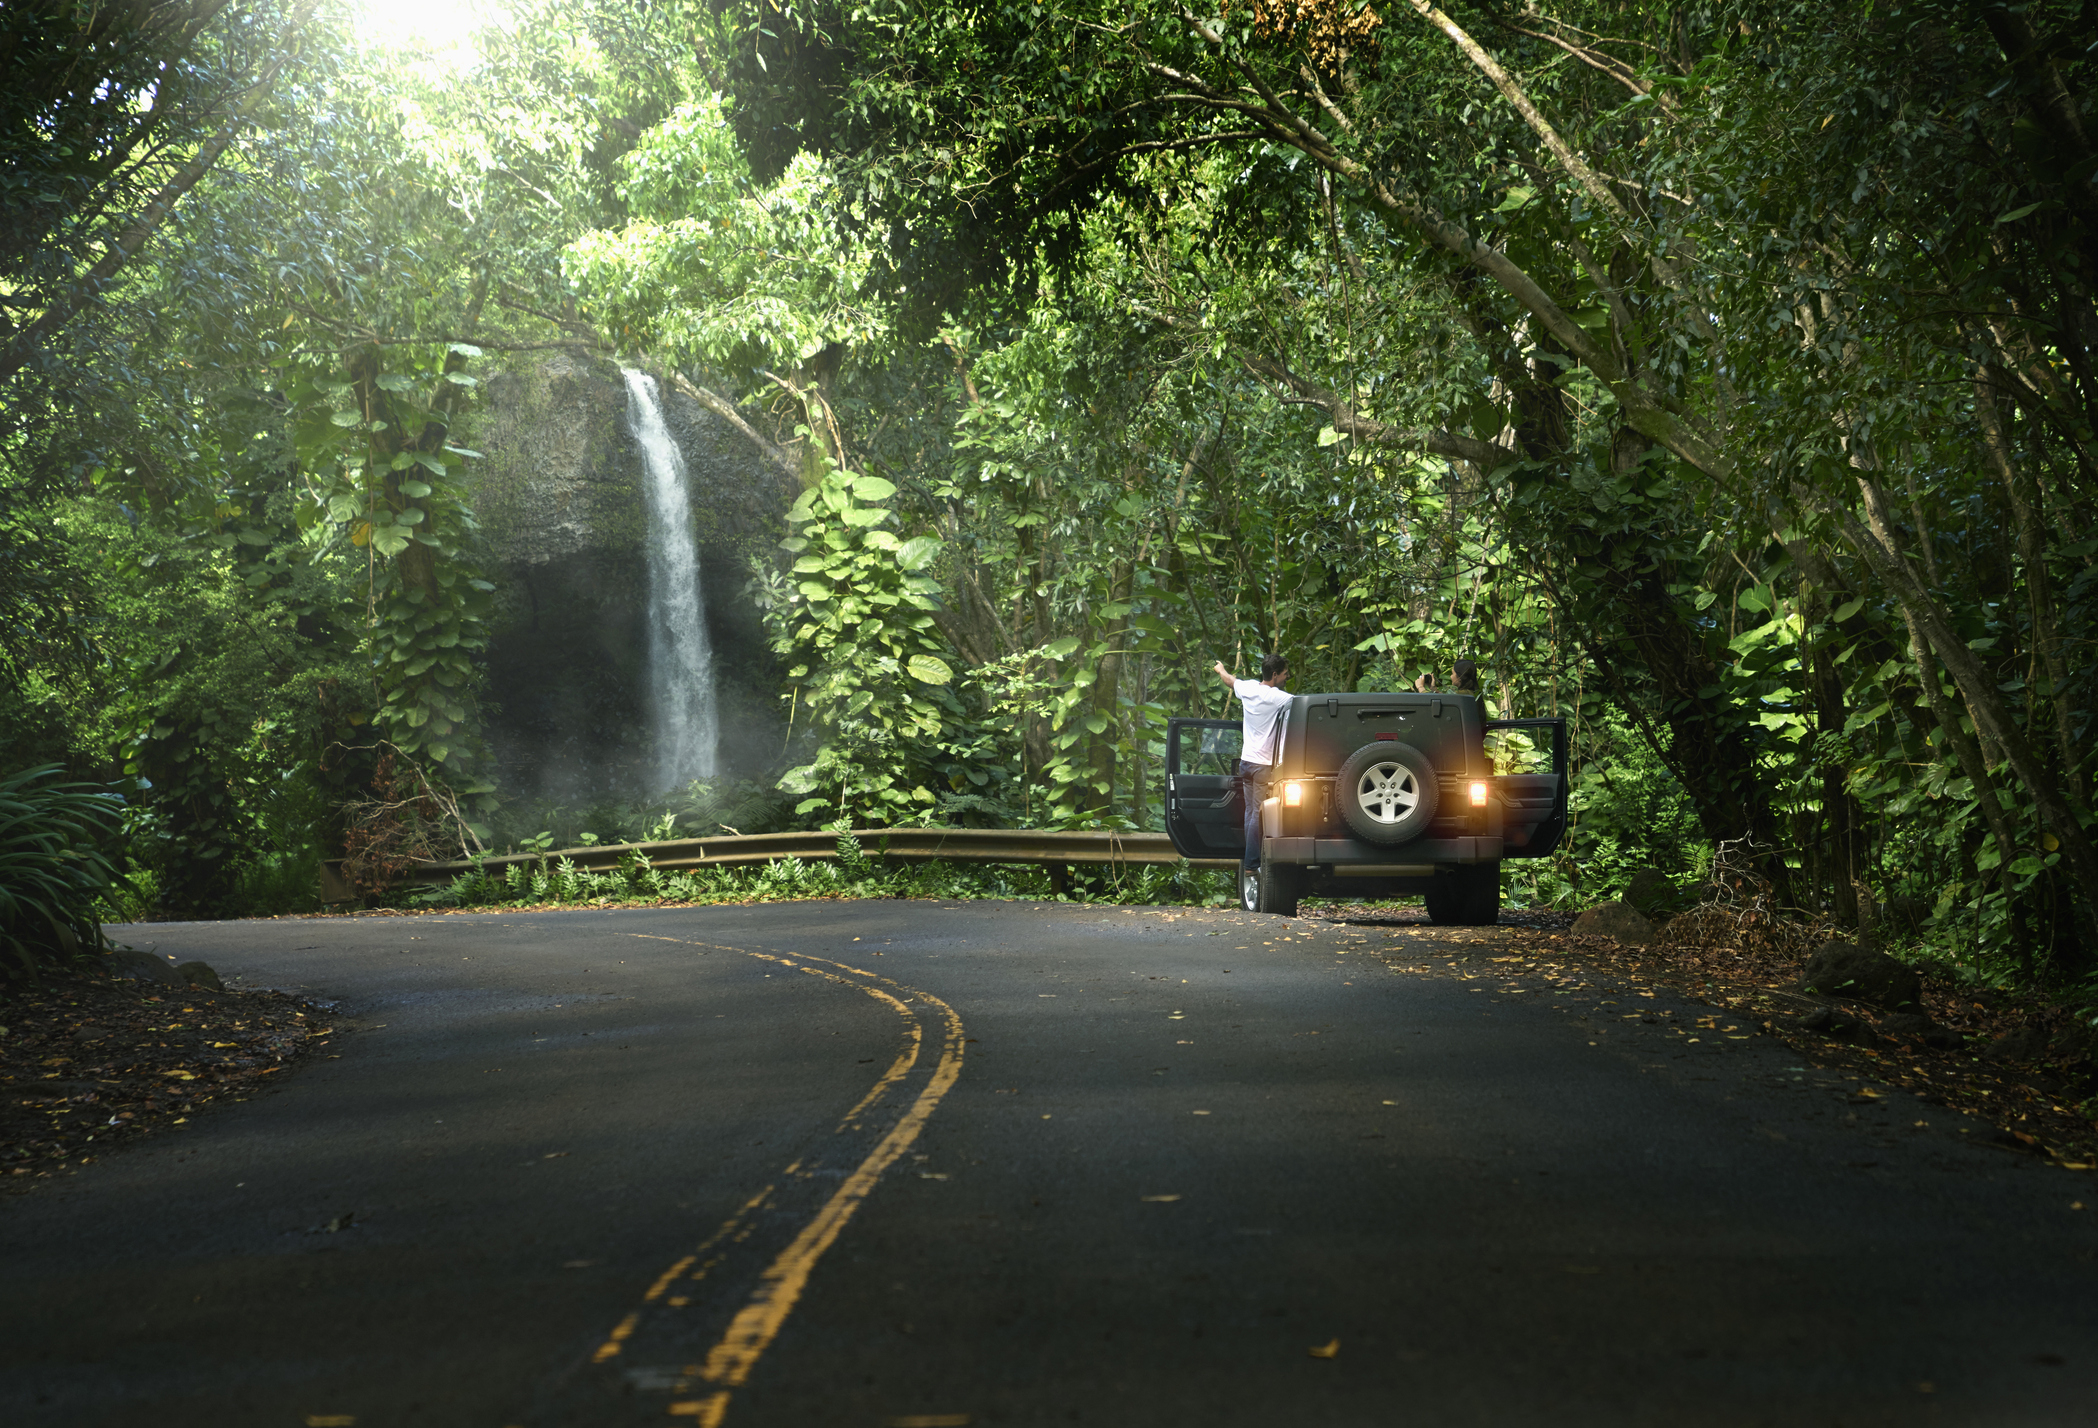 Car on forest road with a waterfall by its side